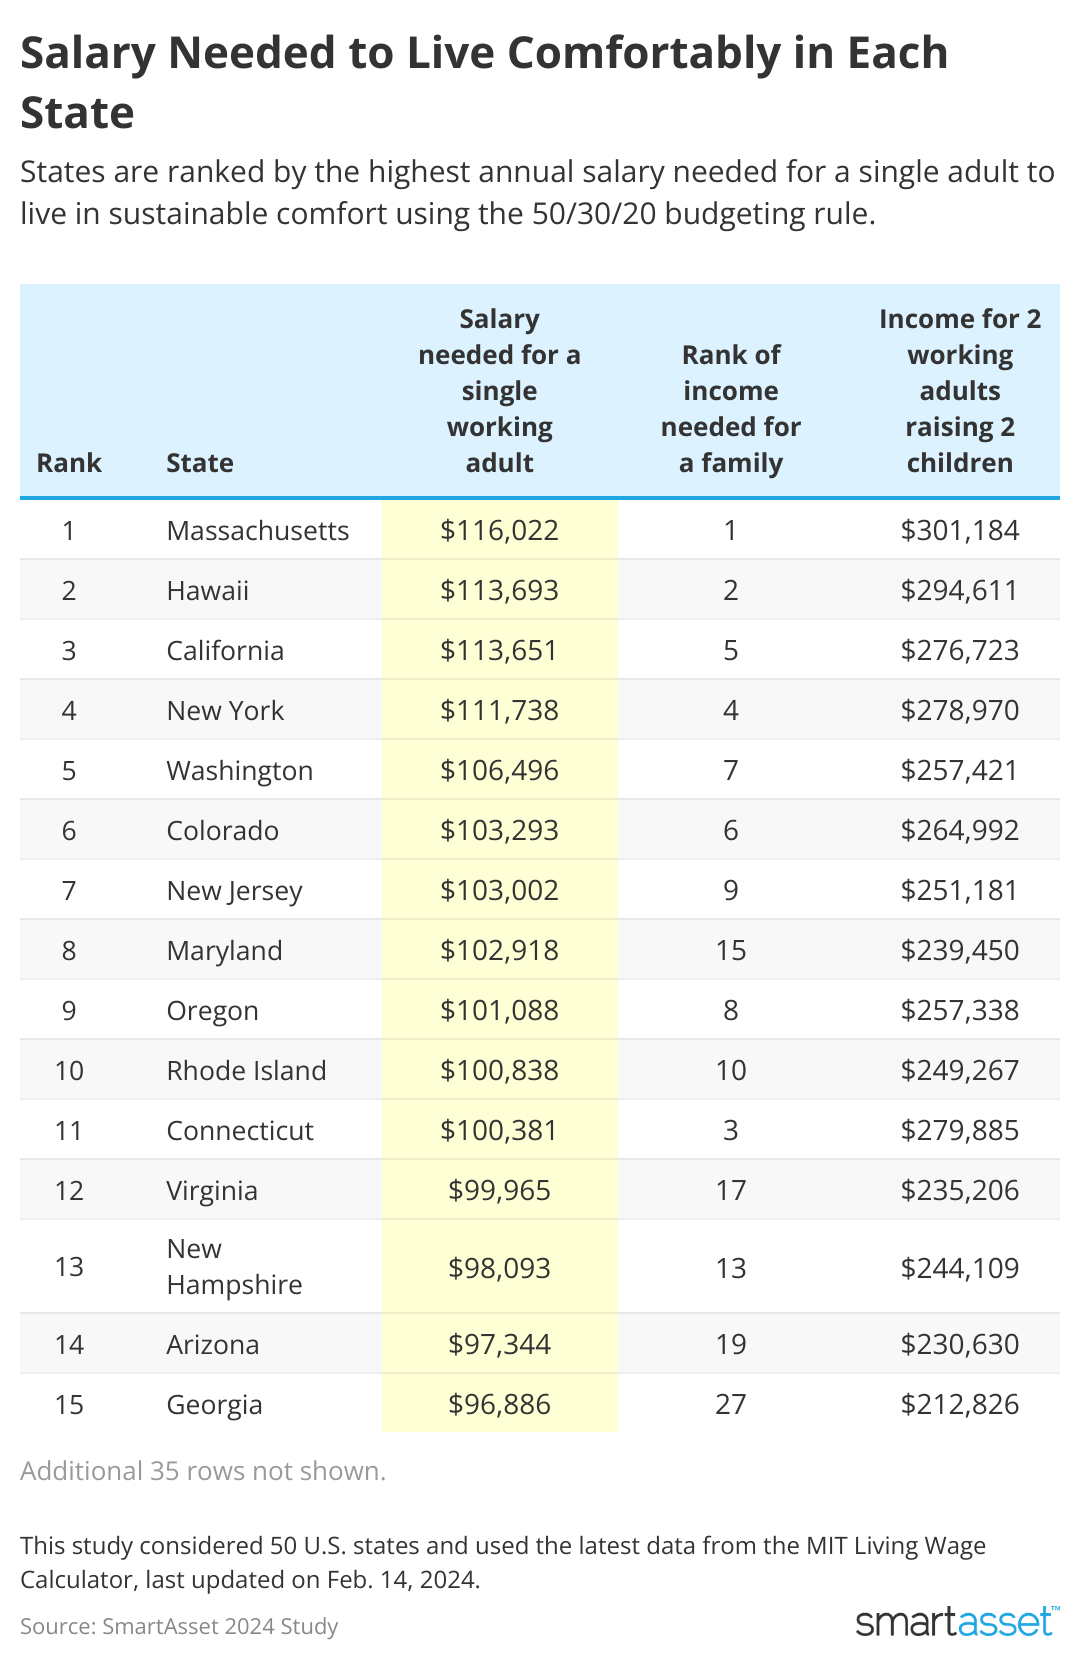 Table showing salary needed to live comfortably in each state.